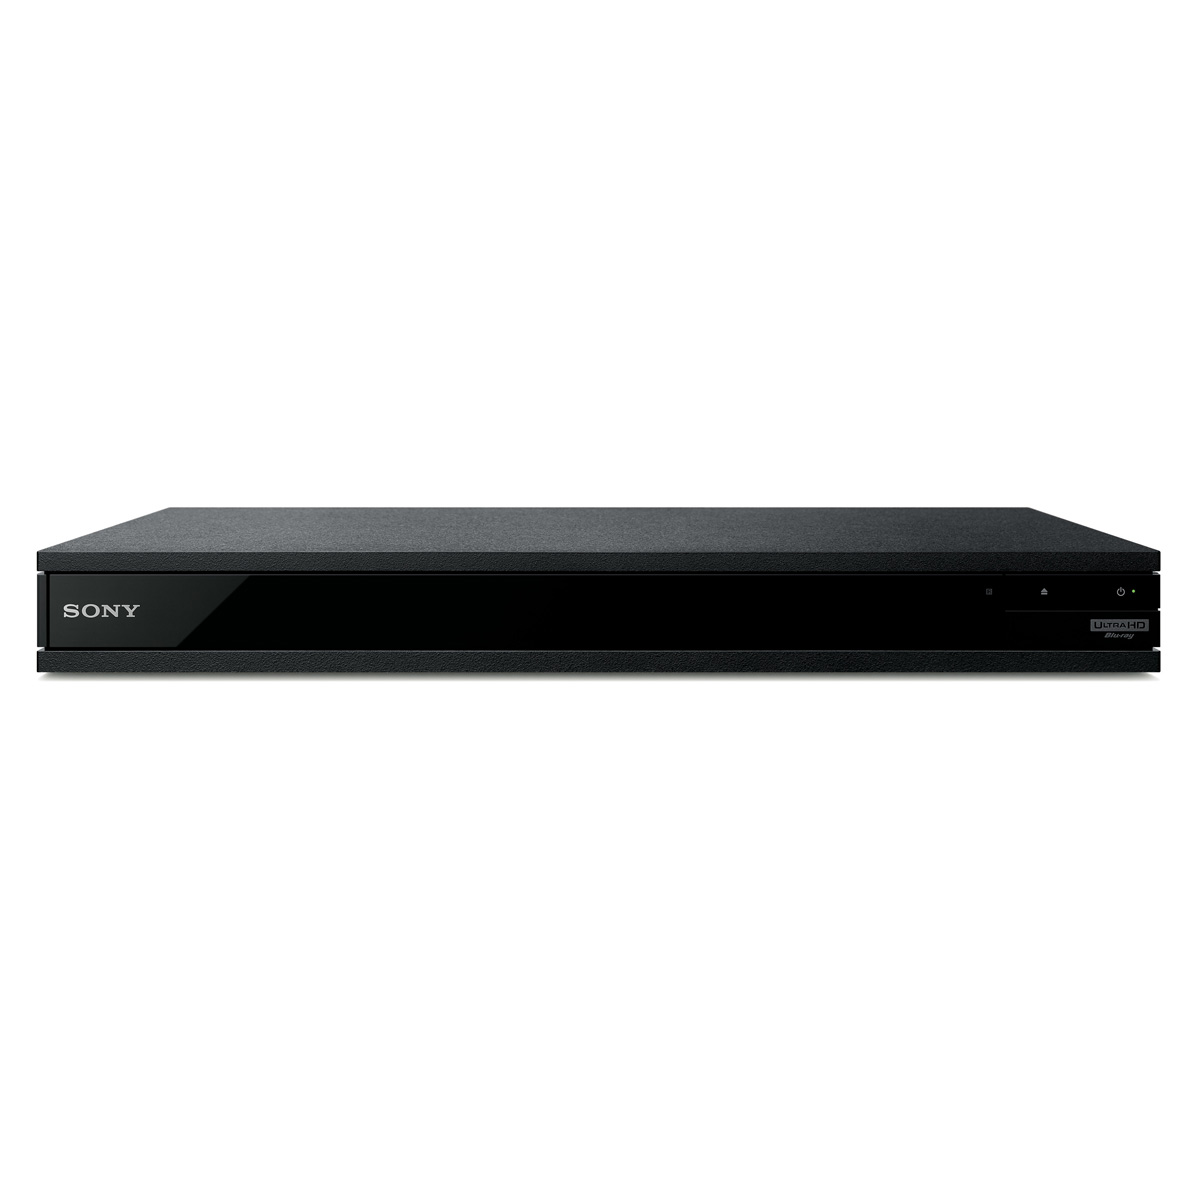 Sony UBP-X800M2 4K Ultra HD Home Theater Streaming Blu-Ray Player with High-Resolution Audio and Wi-Fi Built-In - image 1 of 6